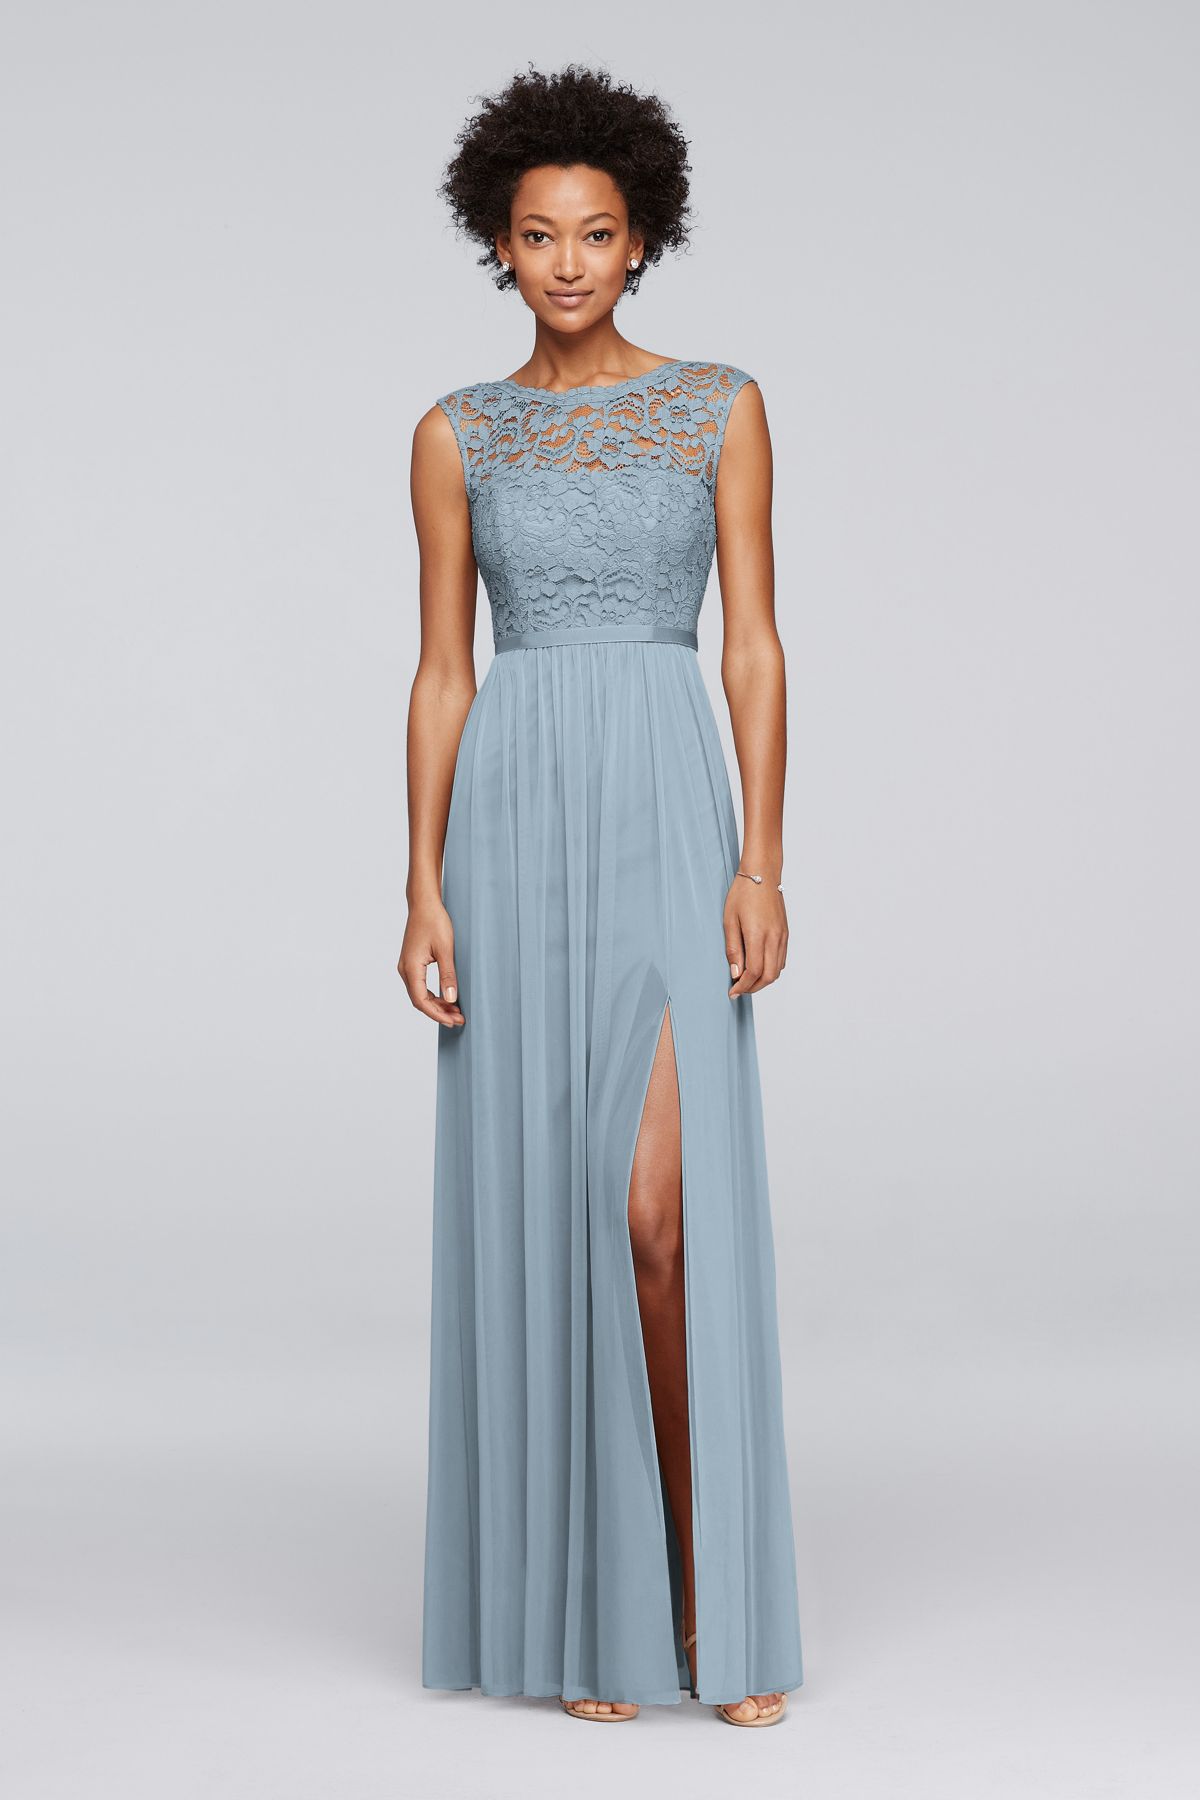 Dusty blue bridesmaid dress long lace and tulle